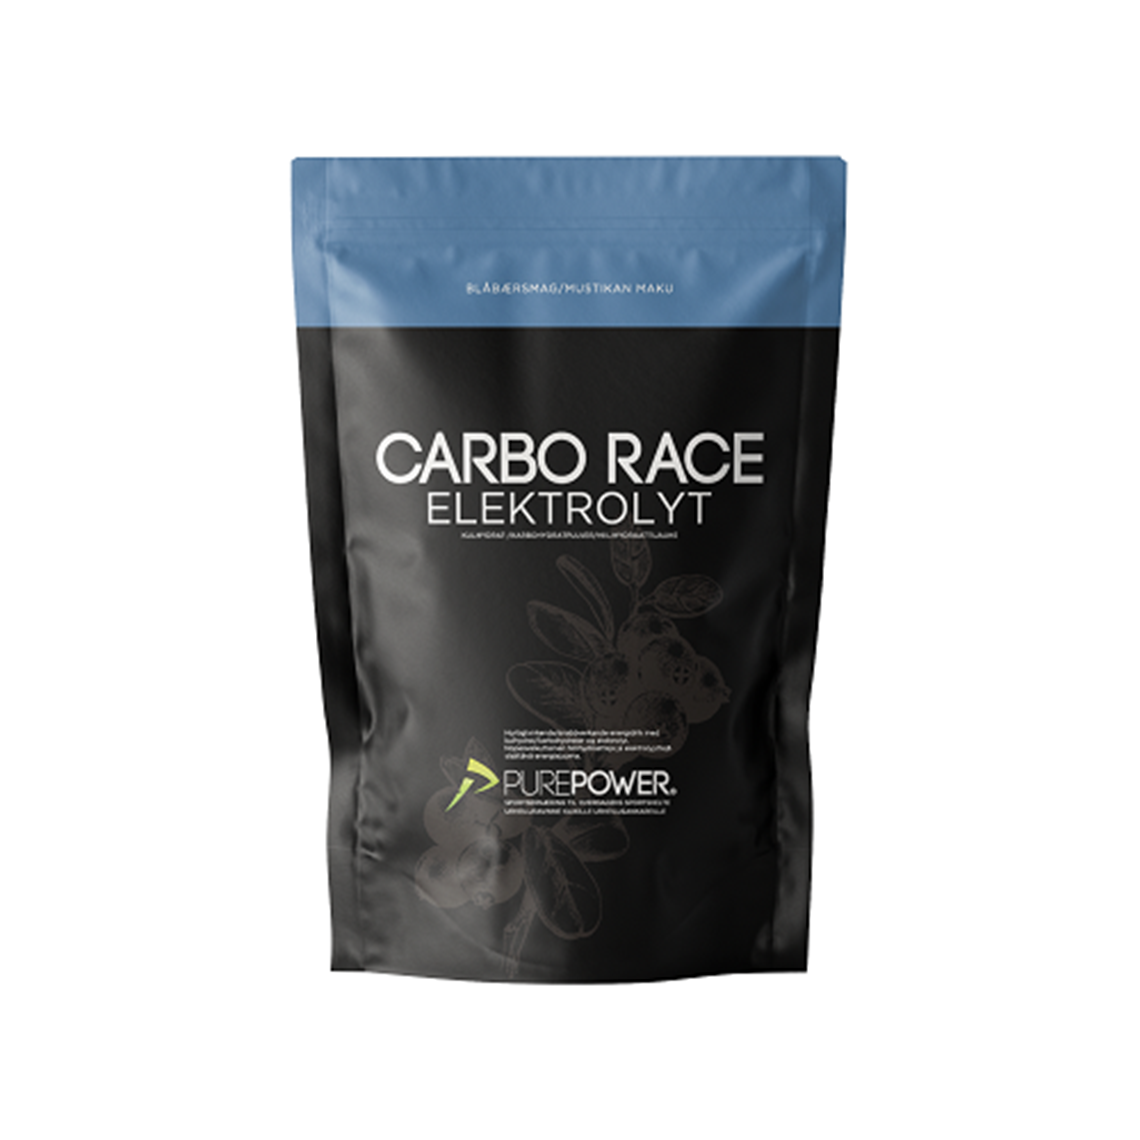 Carbo Race Electrolyte Blueberry 1 kg